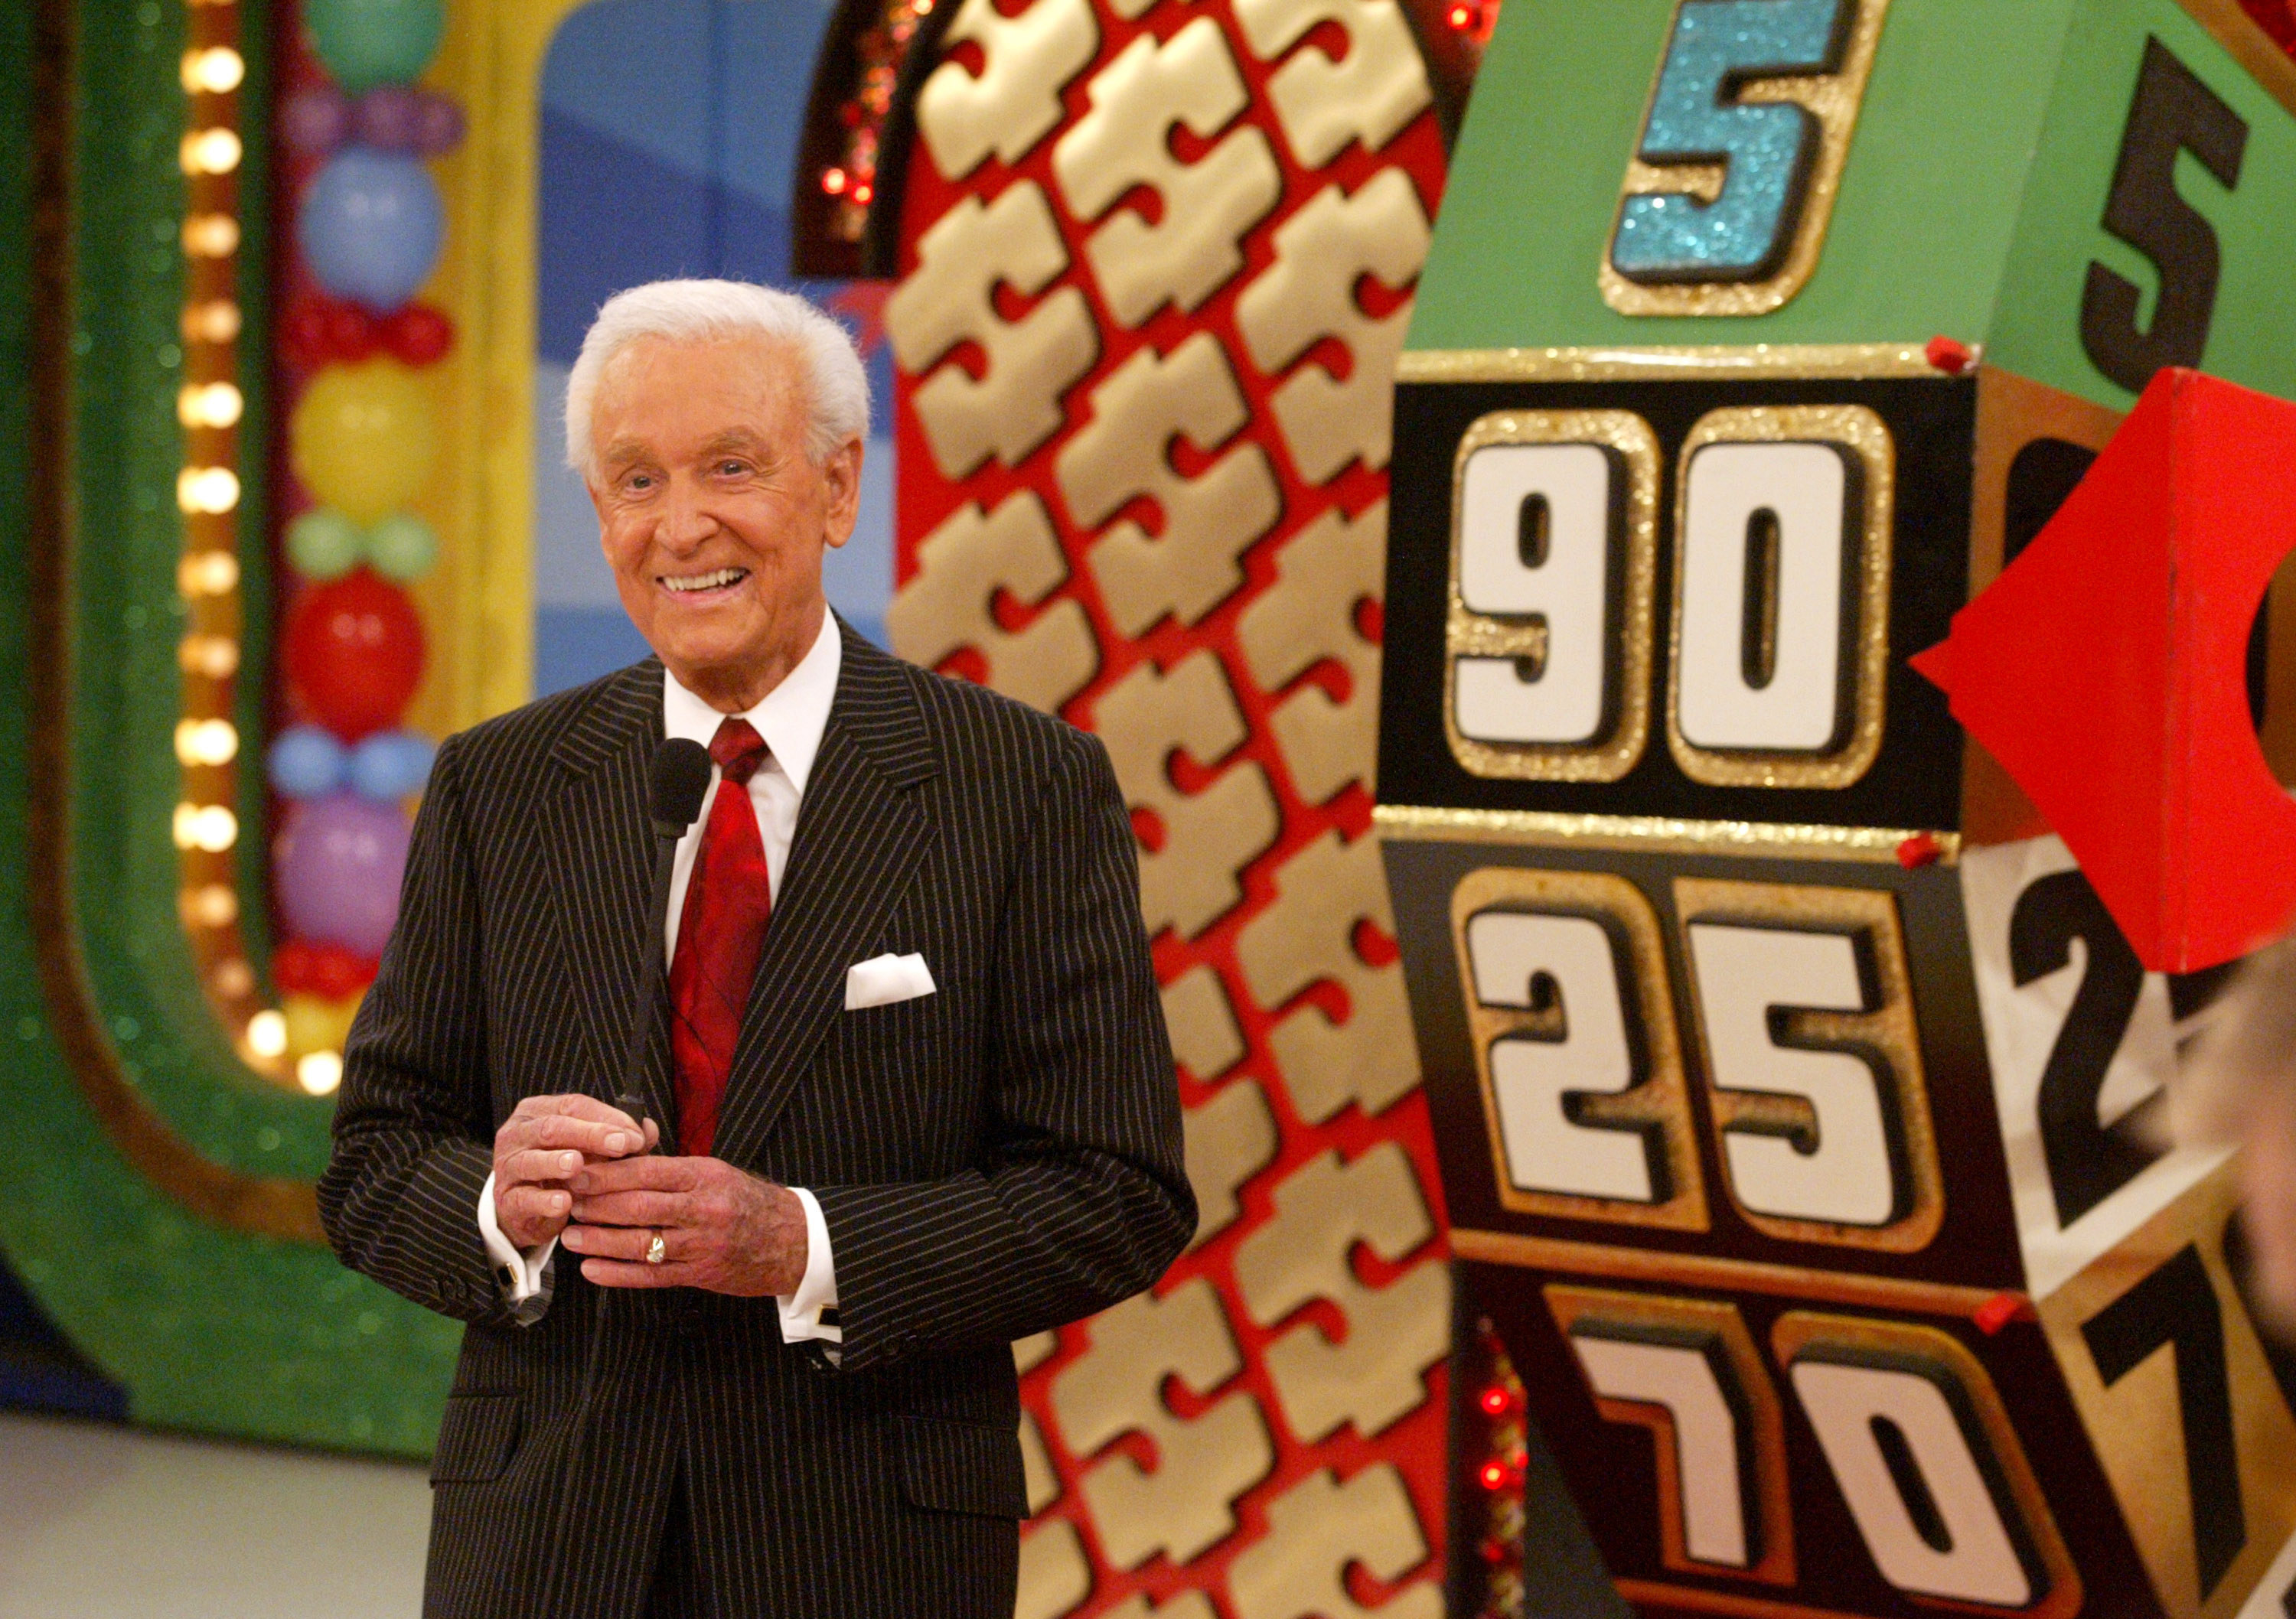 Bob Barker standing near the wheel with his microphone on &quot;The Price Is Right&quot;